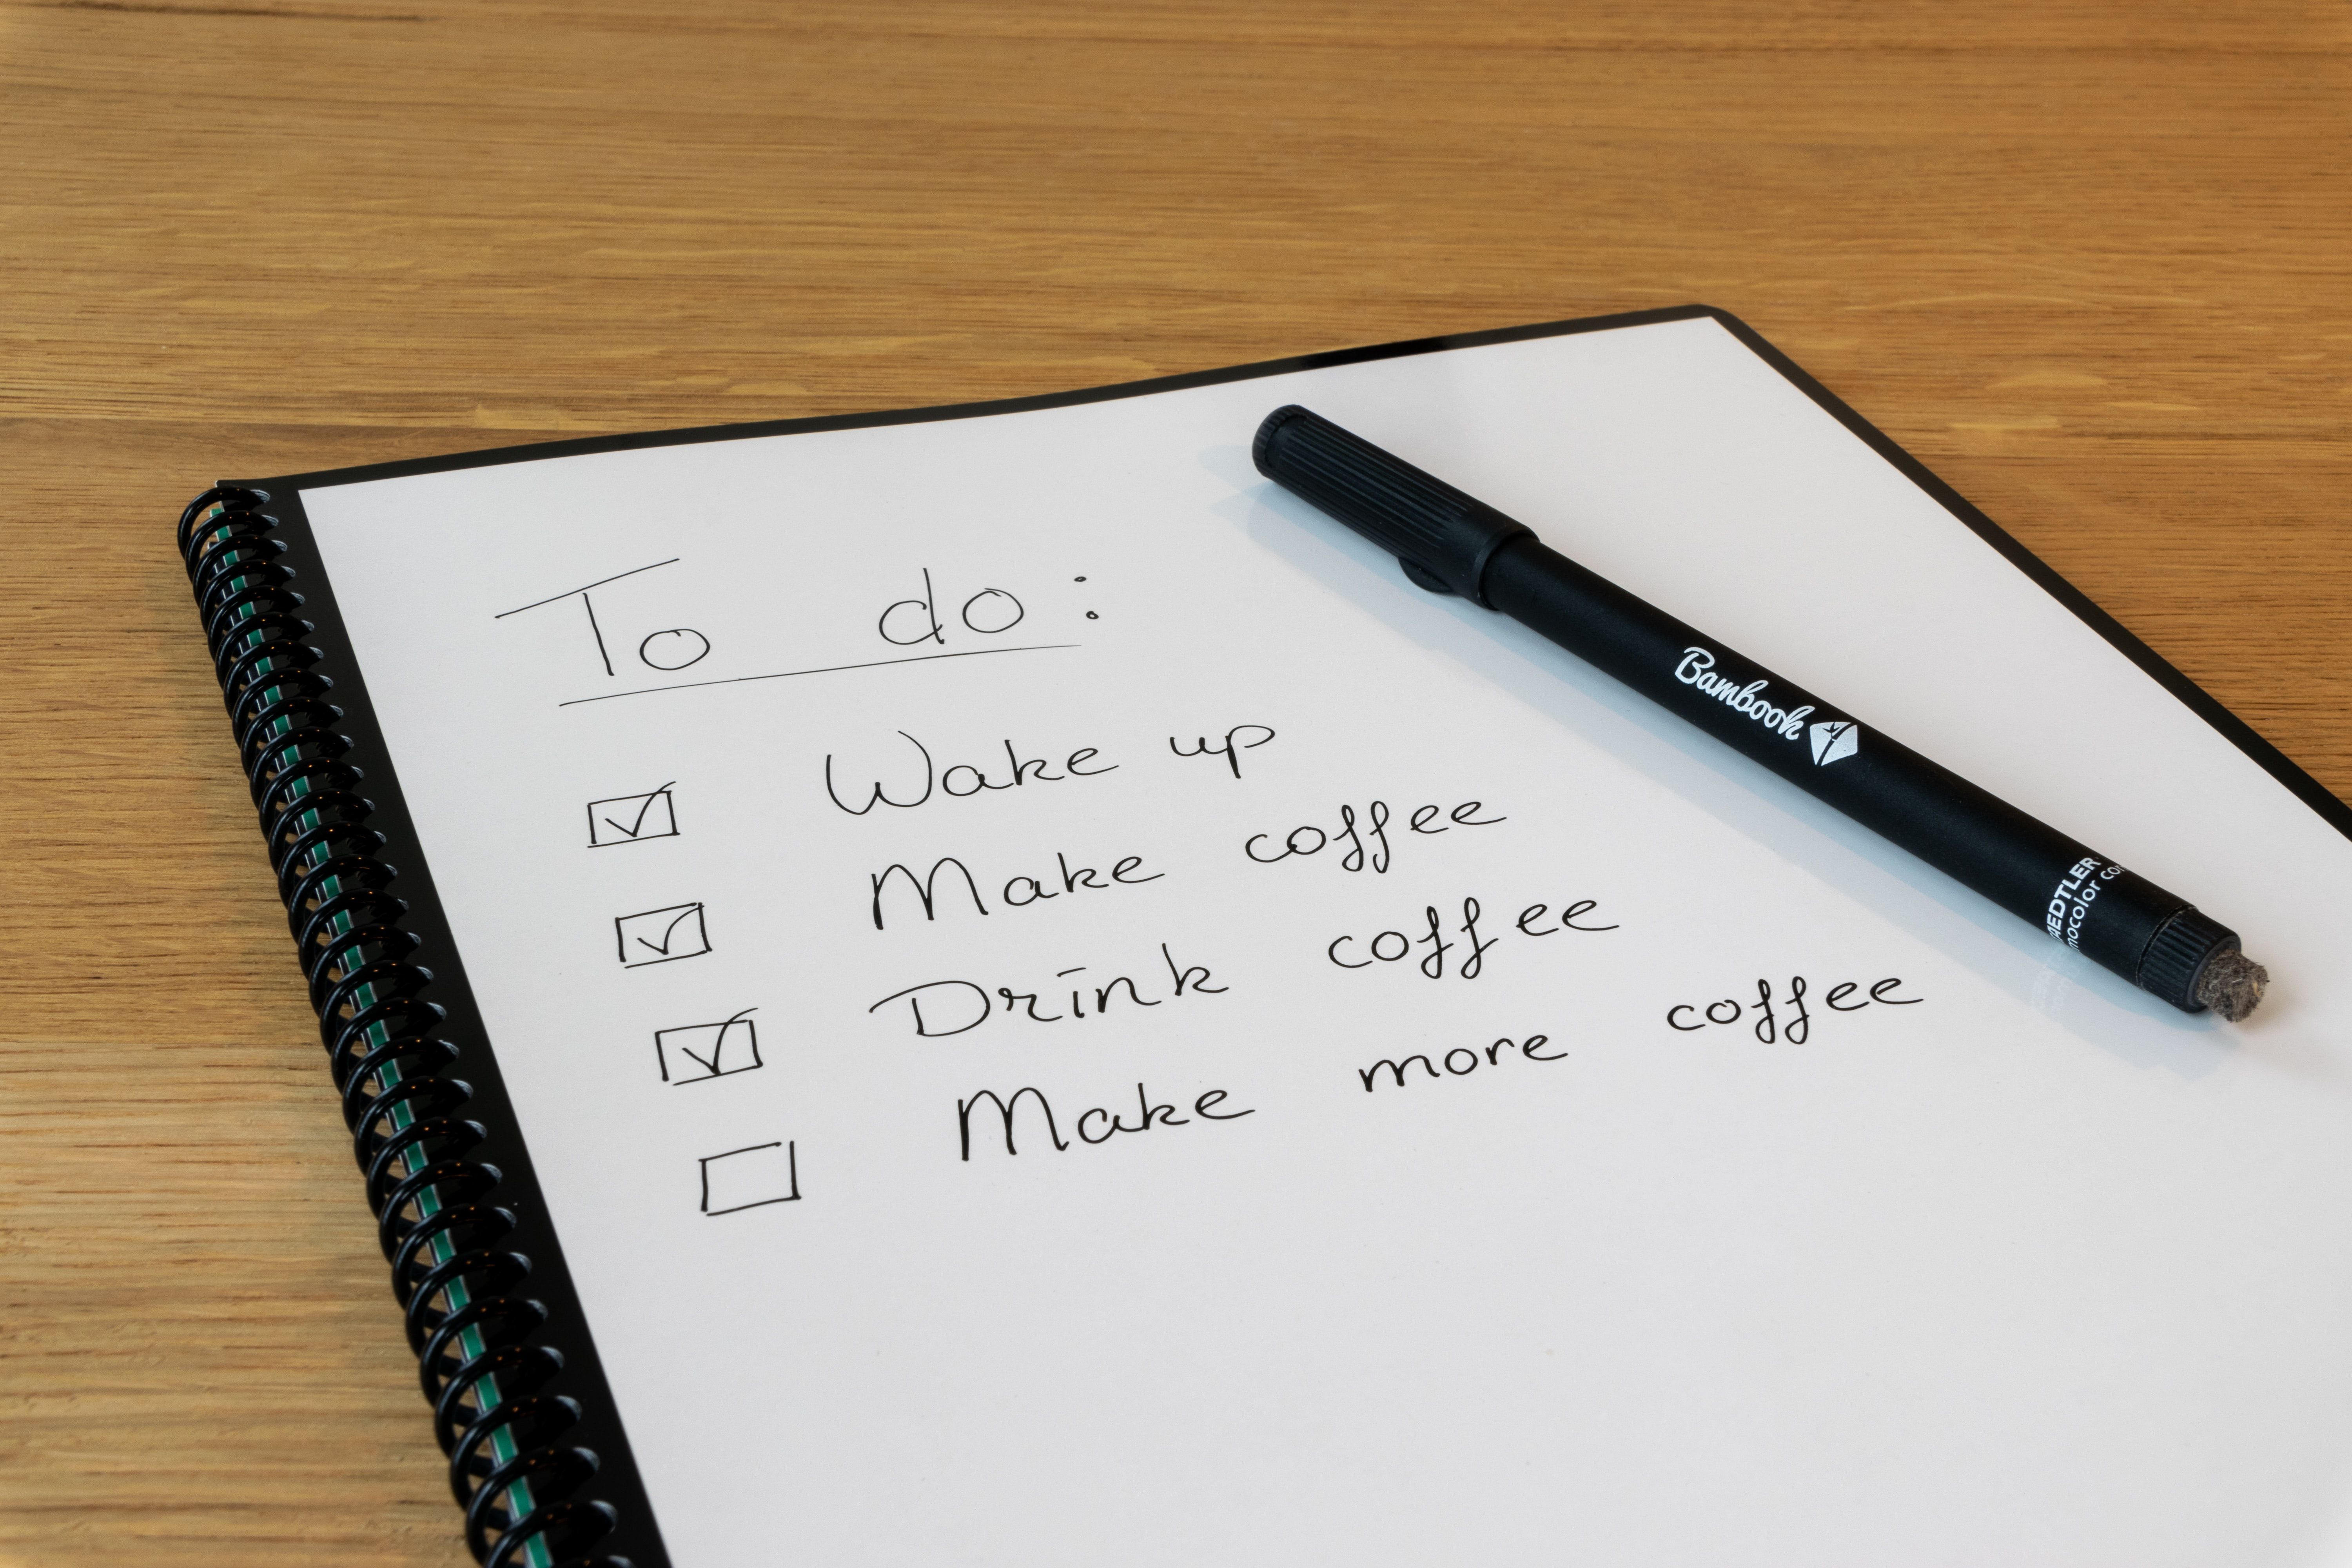 A reasonable to-do list in a notebook